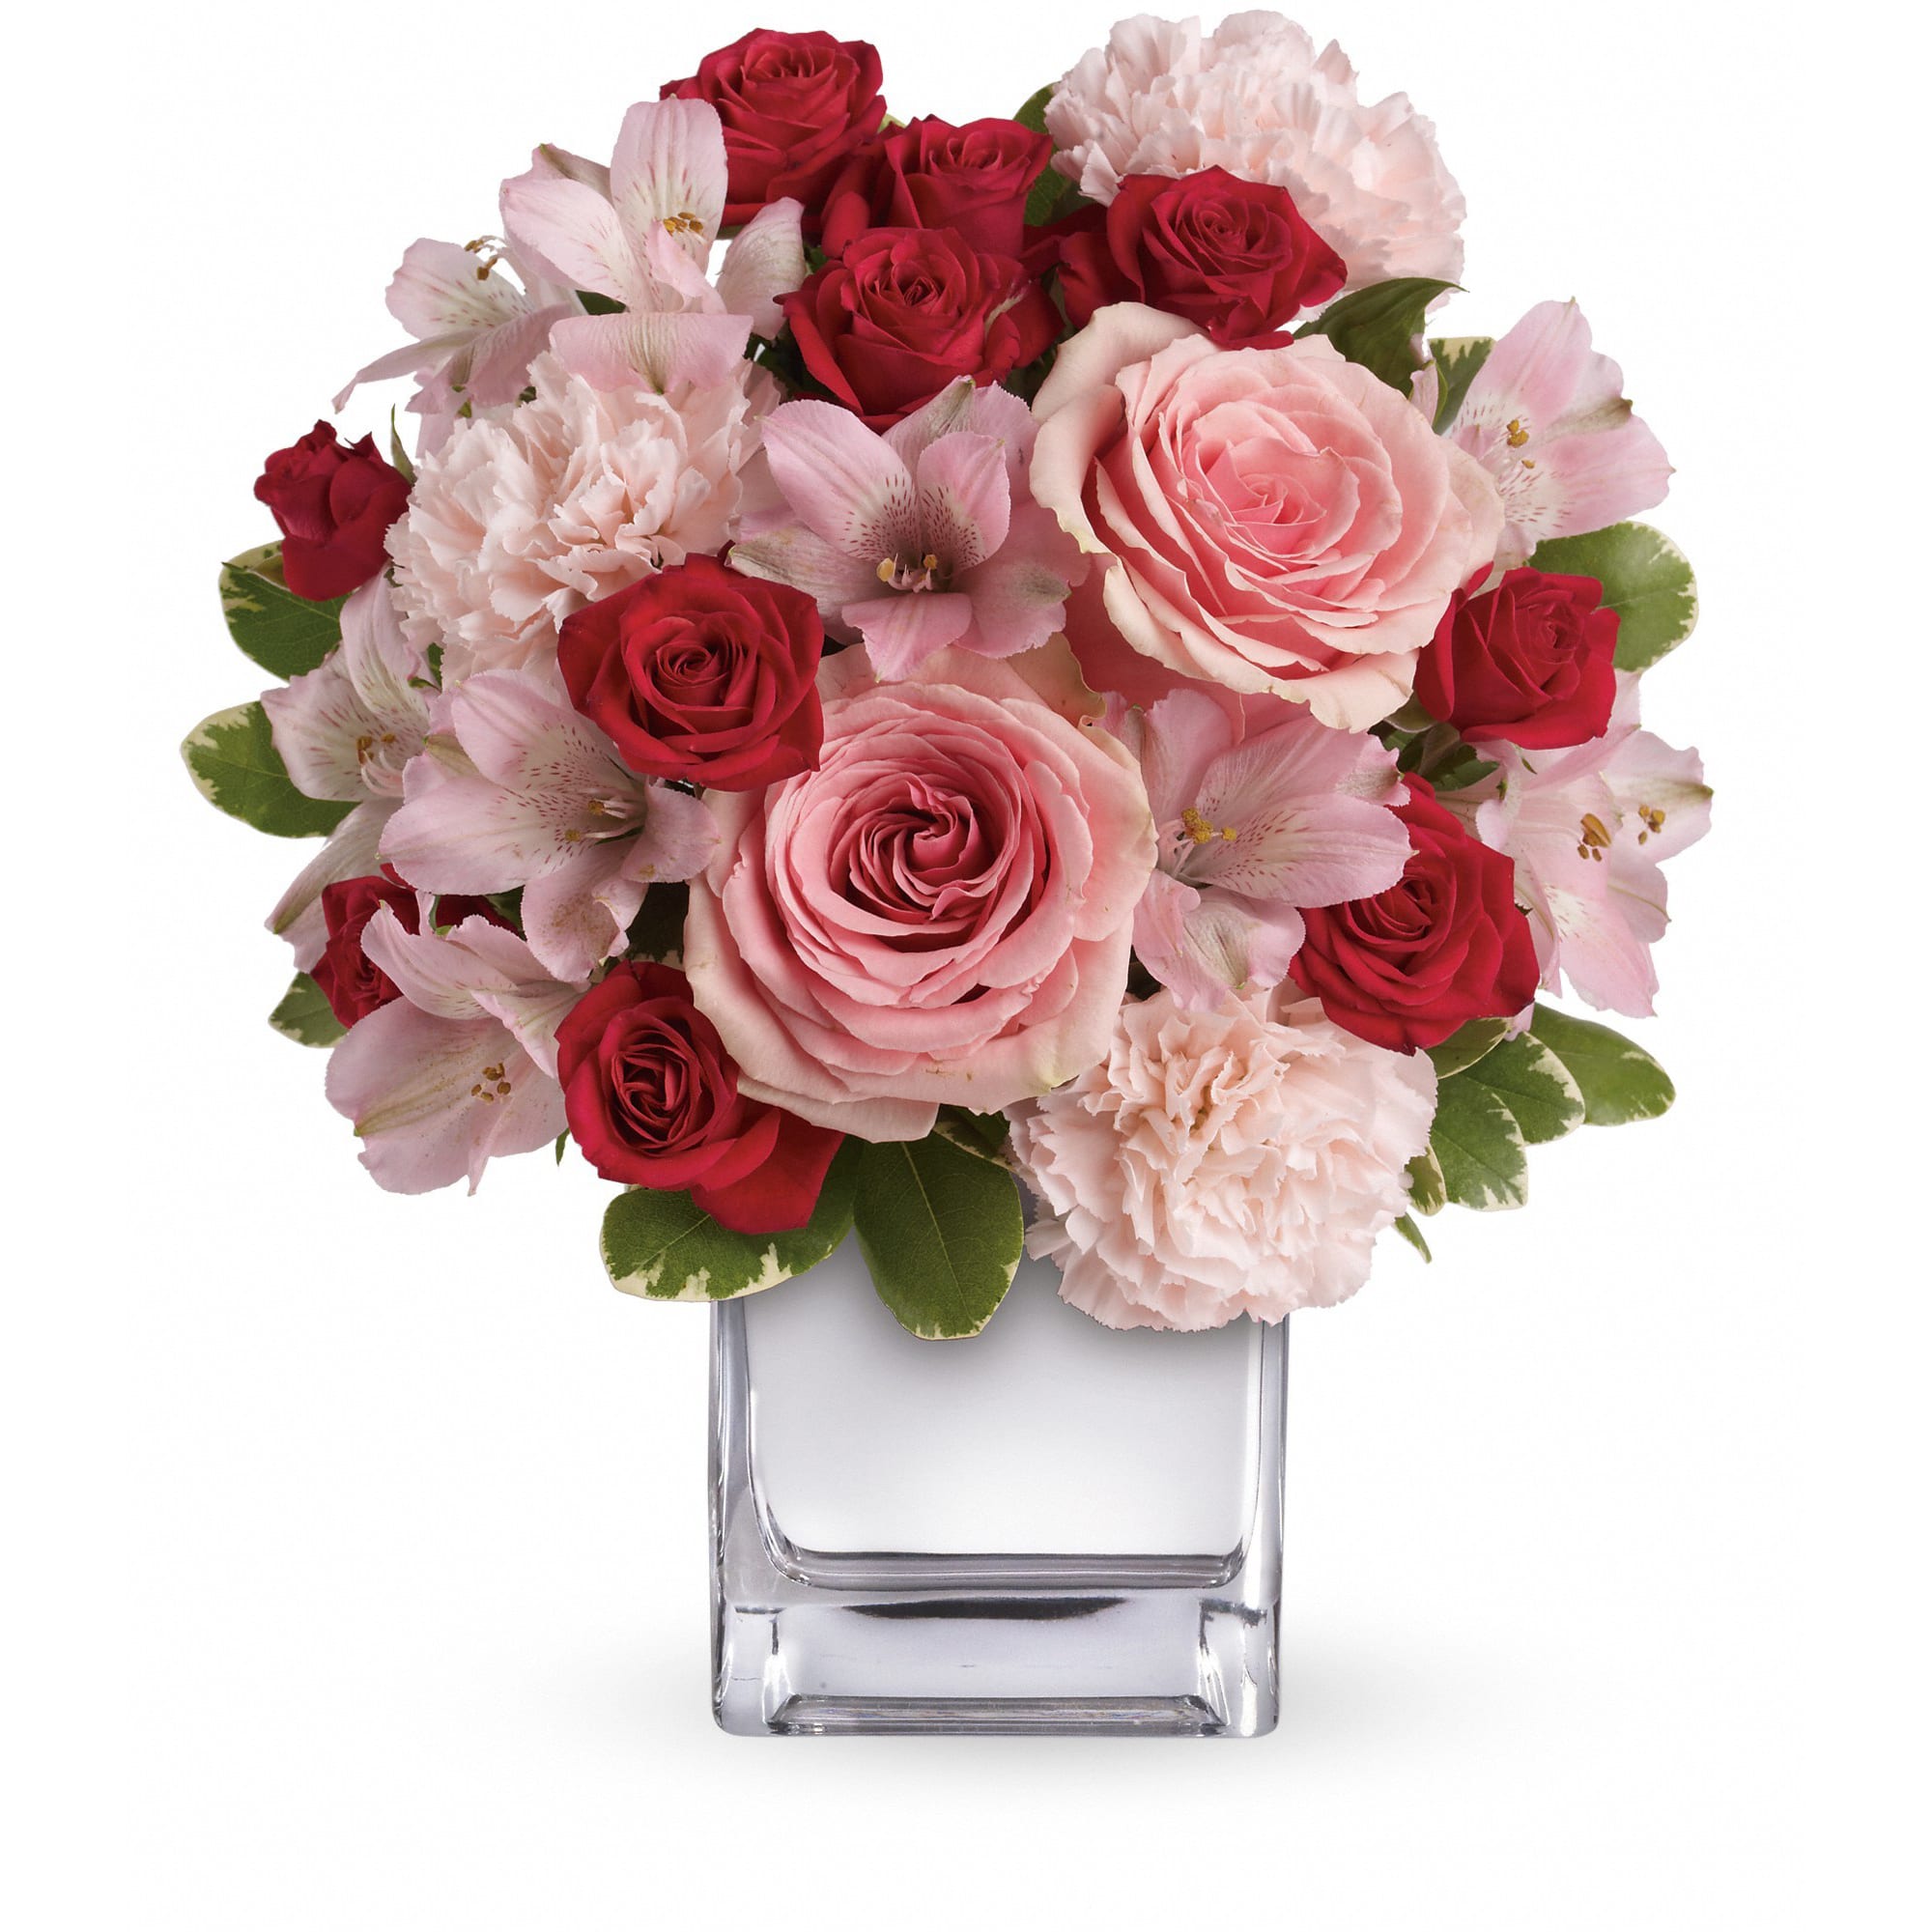 Teleflora's Love That Pink Bouquet with Roses - Passionately pretty in pink, this gorgeous array of pink and red roses and other favorites in a chic mirrored silver cube is a guaranteed heart-winner. She'll be thrilled with the gift, and knocked out by your impeccable taste.  